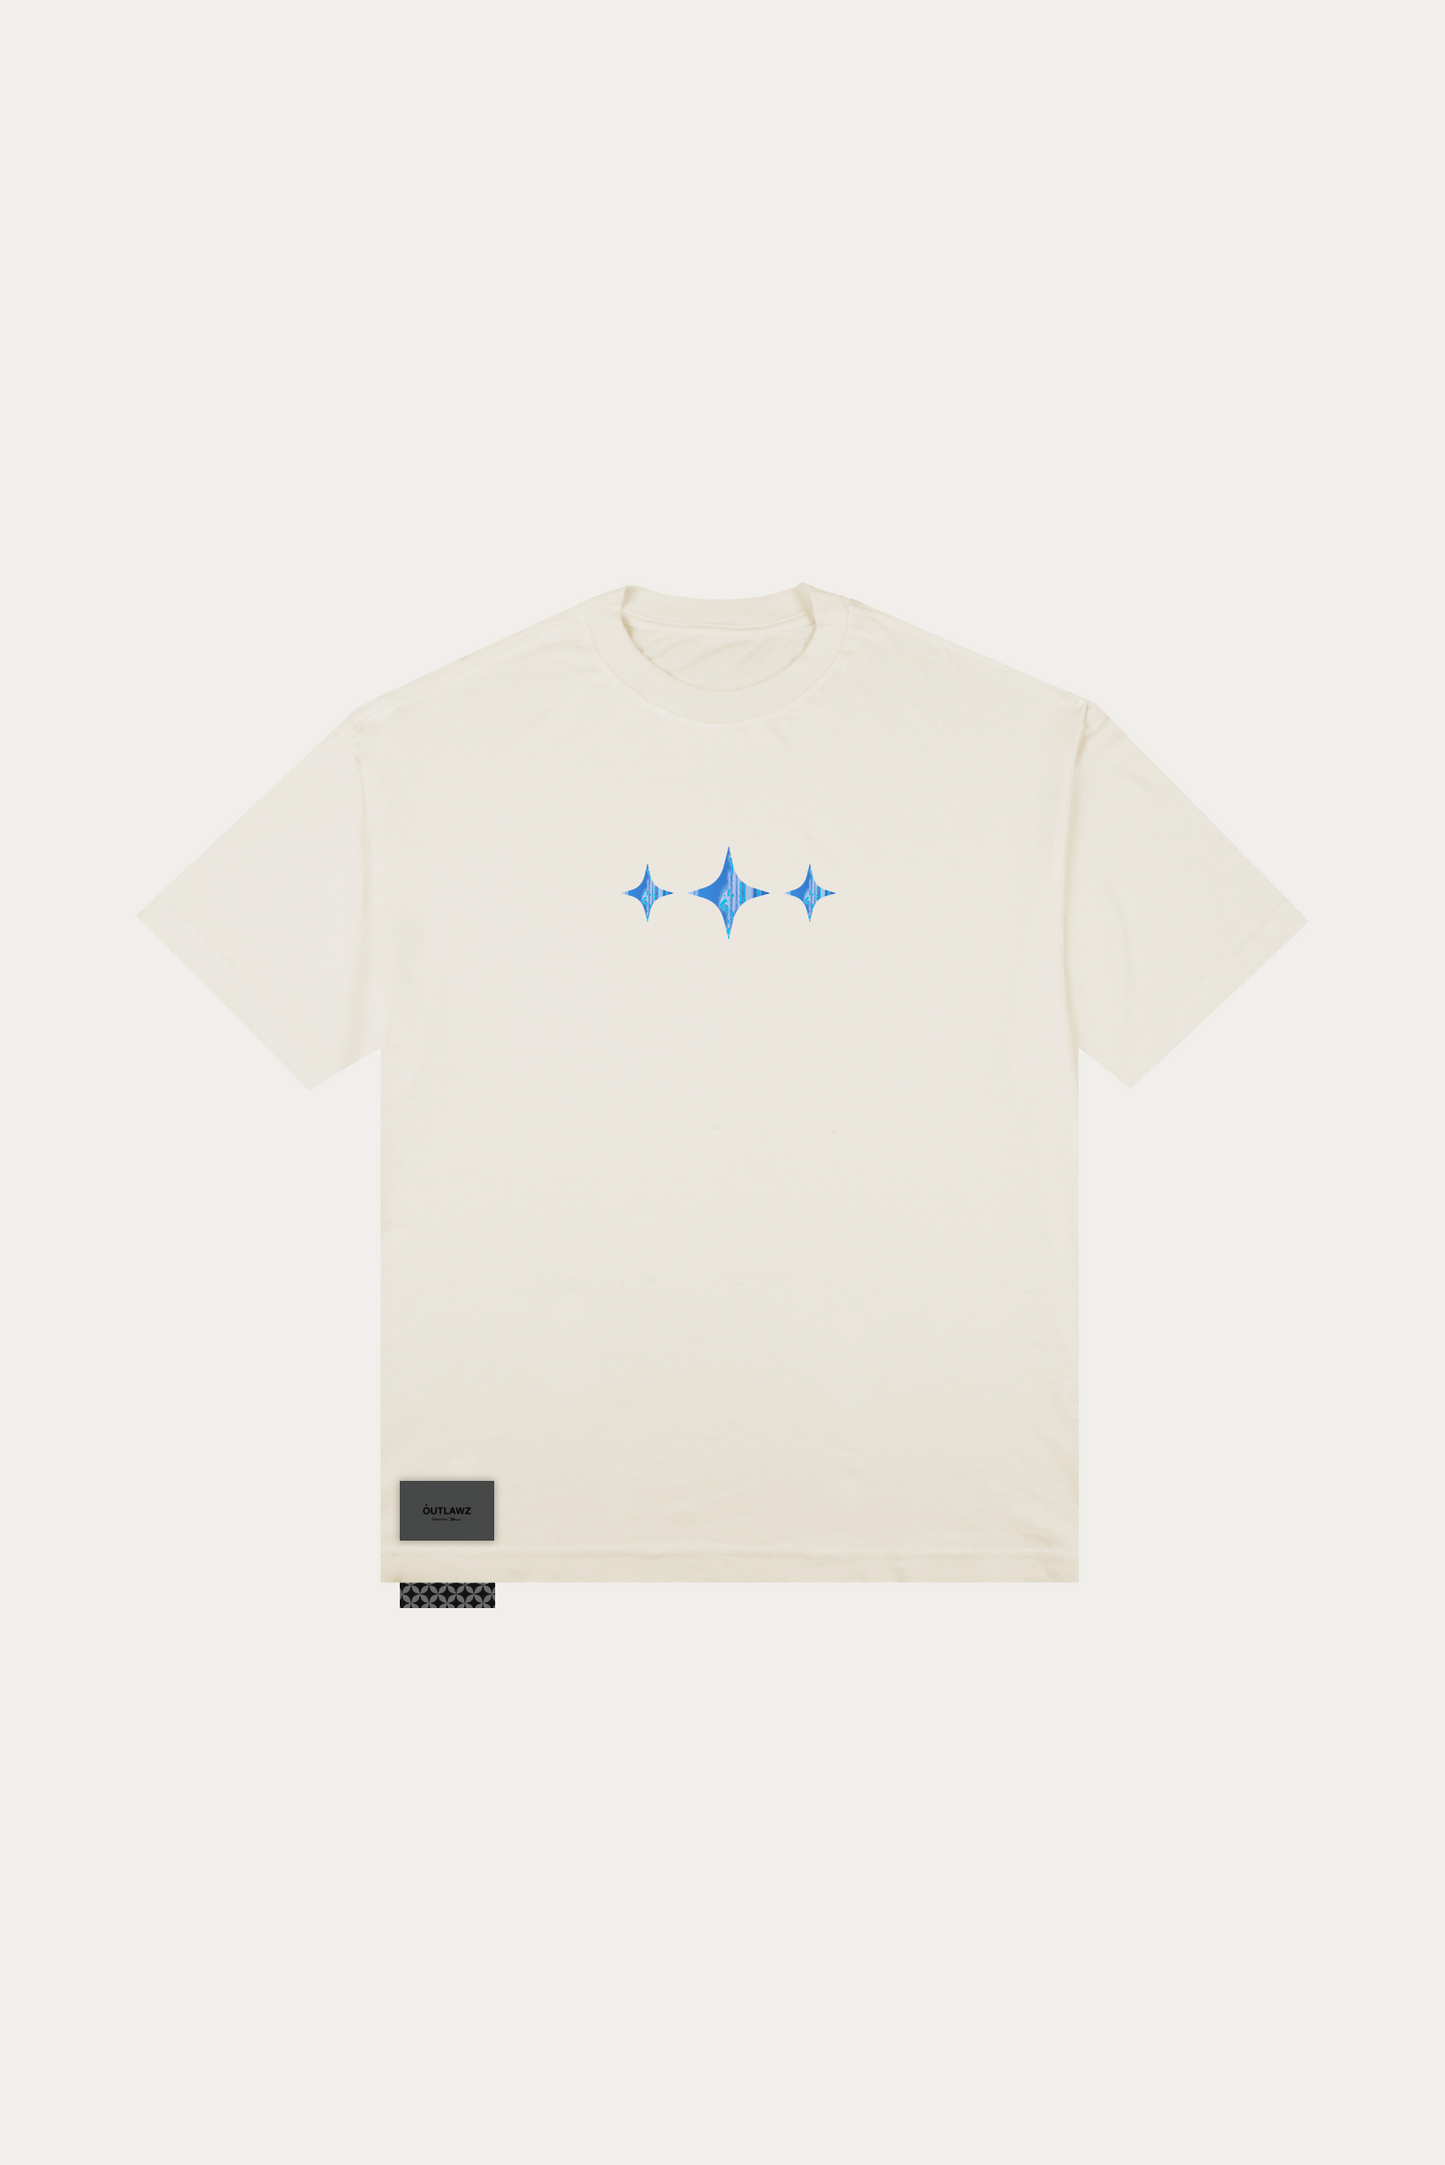 T-Shirt Over Boxy "2 HEADS" - Off White